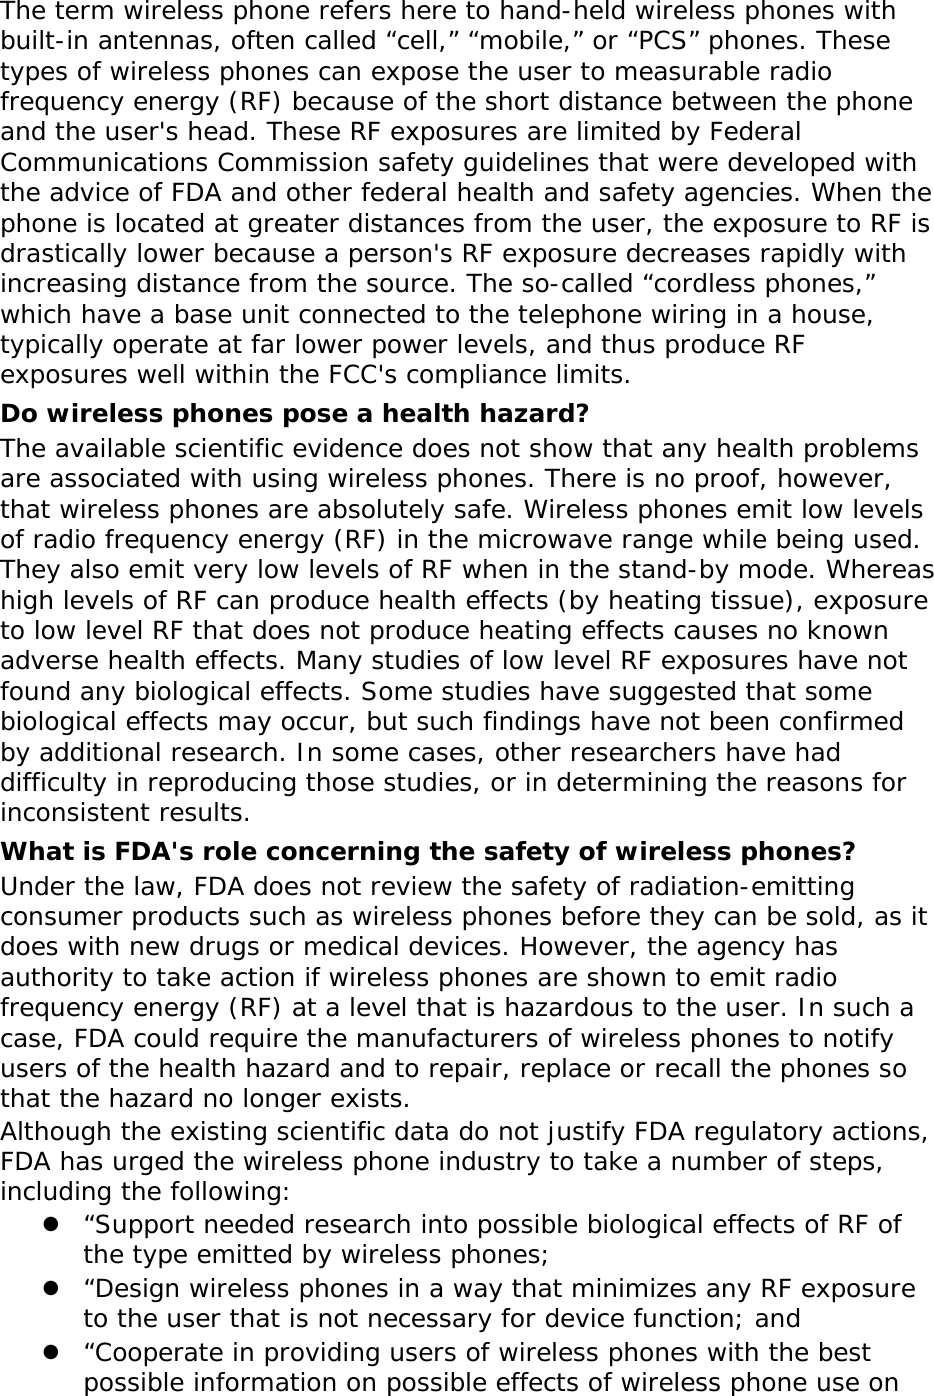 The term wireless phone refers here to hand-held wireless phones with built-in antennas, often called “cell,” “mobile,” or “PCS” phones. These types of wireless phones can expose the user to measurable radio frequency energy (RF) because of the short distance between the phone and the user&apos;s head. These RF exposures are limited by Federal Communications Commission safety guidelines that were developed with the advice of FDA and other federal health and safety agencies. When the phone is located at greater distances from the user, the exposure to RF is drastically lower because a person&apos;s RF exposure decreases rapidly with increasing distance from the source. The so-called “cordless phones,” which have a base unit connected to the telephone wiring in a house, typically operate at far lower power levels, and thus produce RF exposures well within the FCC&apos;s compliance limits. Do wireless phones pose a health hazard? The available scientific evidence does not show that any health problems are associated with using wireless phones. There is no proof, however, that wireless phones are absolutely safe. Wireless phones emit low levels of radio frequency energy (RF) in the microwave range while being used. They also emit very low levels of RF when in the stand-by mode. Whereas high levels of RF can produce health effects (by heating tissue), exposure to low level RF that does not produce heating effects causes no known adverse health effects. Many studies of low level RF exposures have not found any biological effects. Some studies have suggested that some biological effects may occur, but such findings have not been confirmed by additional research. In some cases, other researchers have had difficulty in reproducing those studies, or in determining the reasons for inconsistent results. What is FDA&apos;s role concerning the safety of wireless phones? Under the law, FDA does not review the safety of radiation-emitting consumer products such as wireless phones before they can be sold, as it does with new drugs or medical devices. However, the agency has authority to take action if wireless phones are shown to emit radio frequency energy (RF) at a level that is hazardous to the user. In such a case, FDA could require the manufacturers of wireless phones to notify users of the health hazard and to repair, replace or recall the phones so that the hazard no longer exists. Although the existing scientific data do not justify FDA regulatory actions, FDA has urged the wireless phone industry to take a number of steps, including the following:  “Support needed research into possible biological effects of RF of the type emitted by wireless phones;  “Design wireless phones in a way that minimizes any RF exposure to the user that is not necessary for device function; and  “Cooperate in providing users of wireless phones with the best possible information on possible effects of wireless phone use on 